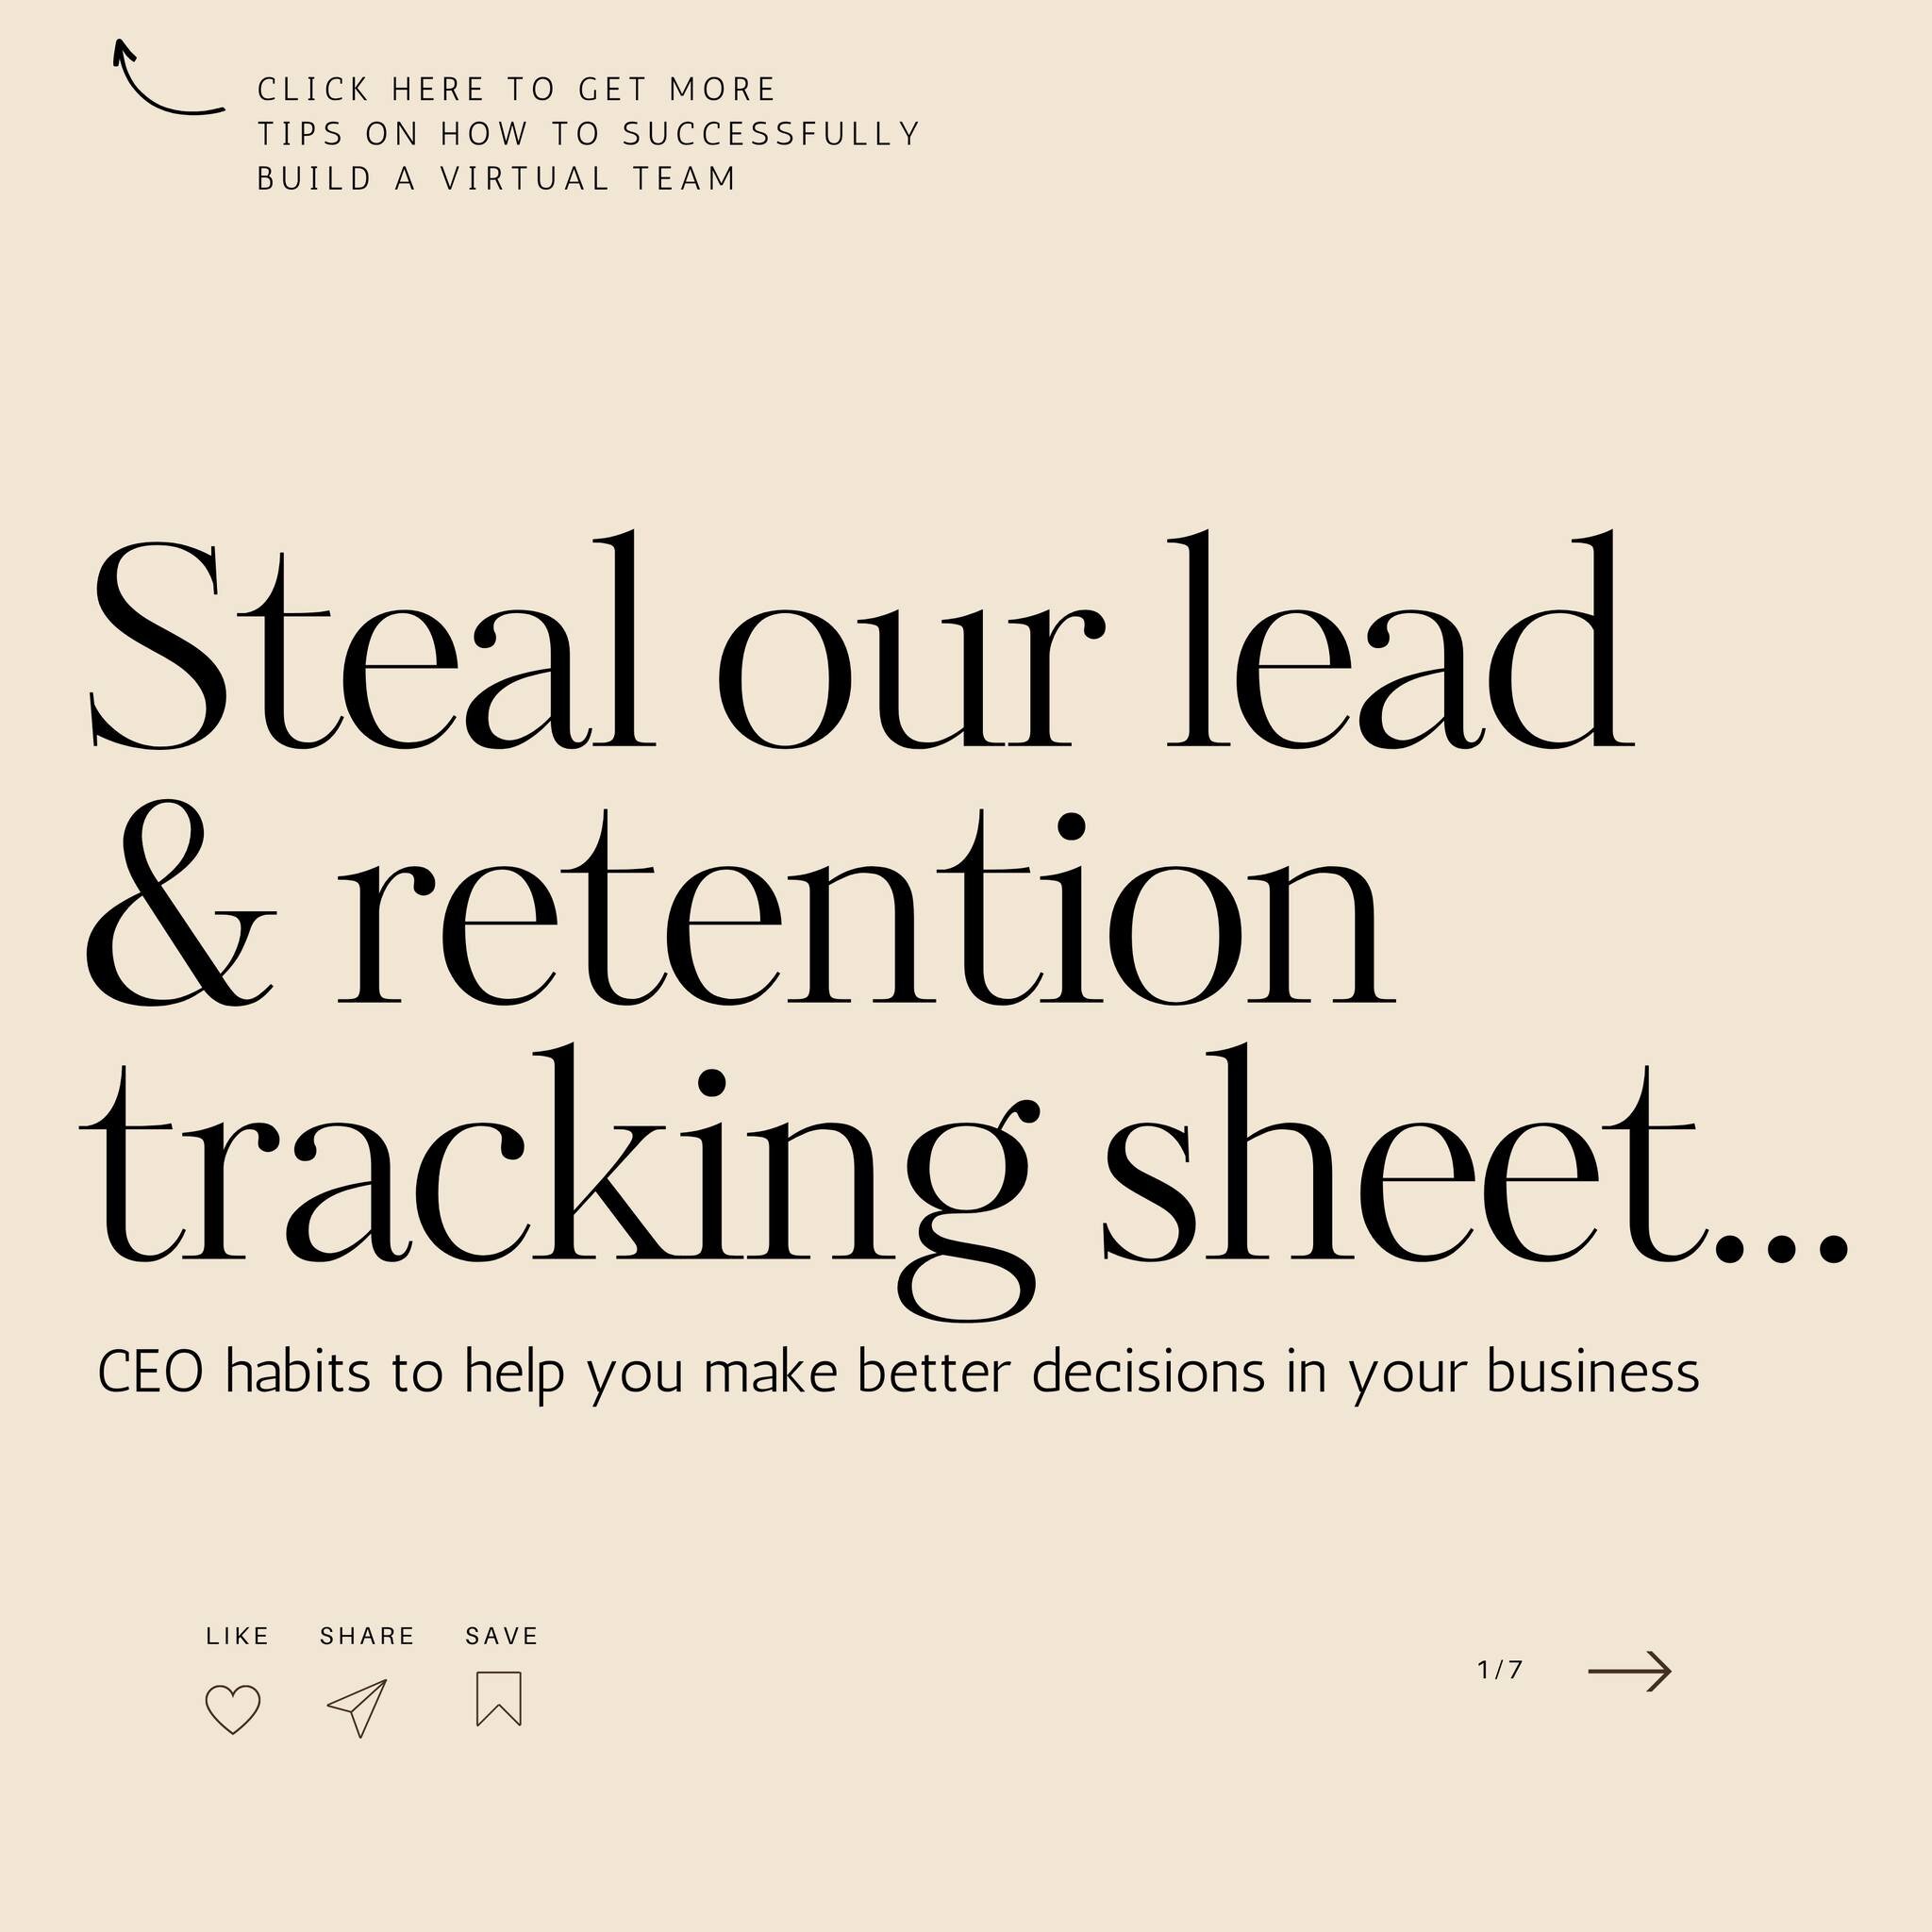 Steal our lead &amp; retention tracking sheet 🙌 📥

🔥 First rule: Keep it simple 
Complicated spreadsheets tend to end up in a folder, never to be used again. So keep it simple and easy to access, we suggest adding it to your bookmarks bar at the t